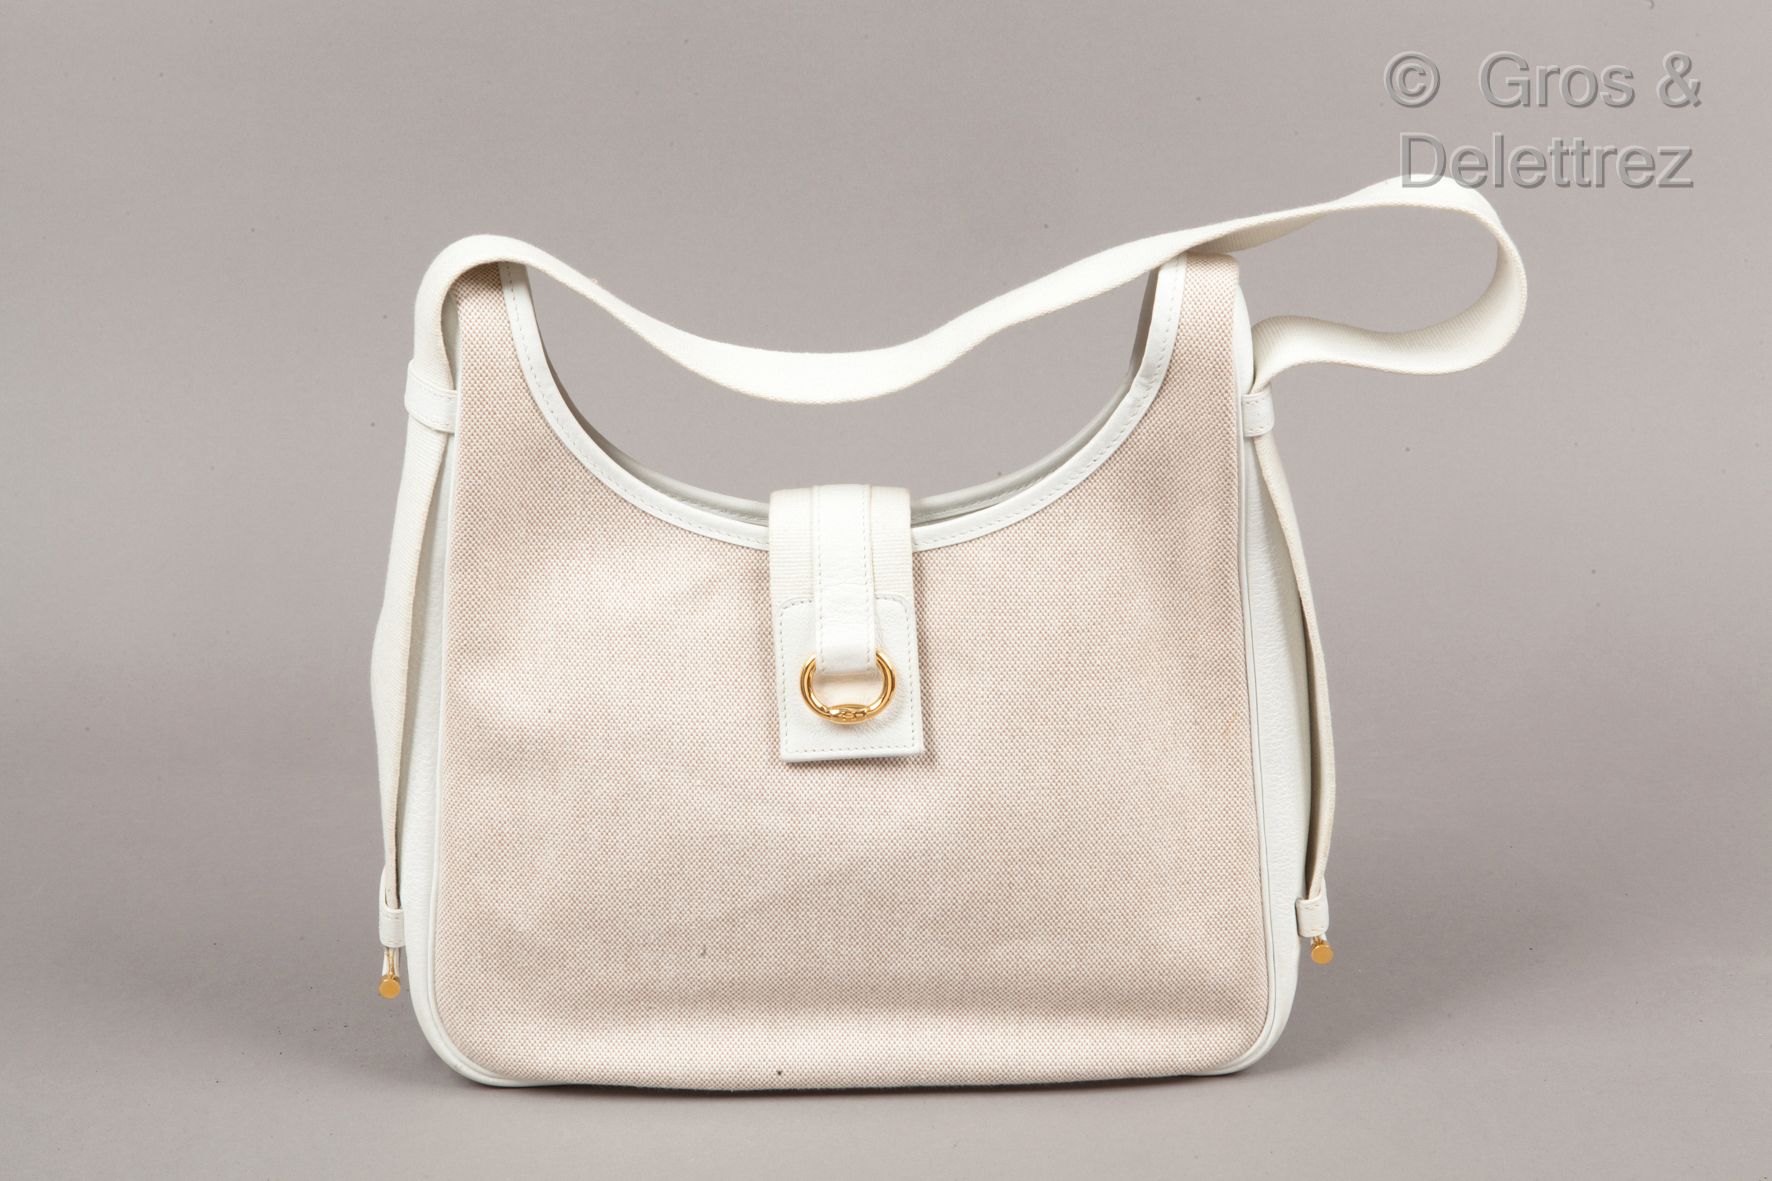 HERMÈS Paris made in France Bag "Tsako" 31 cm in beige canvas and white leather,&hellip;